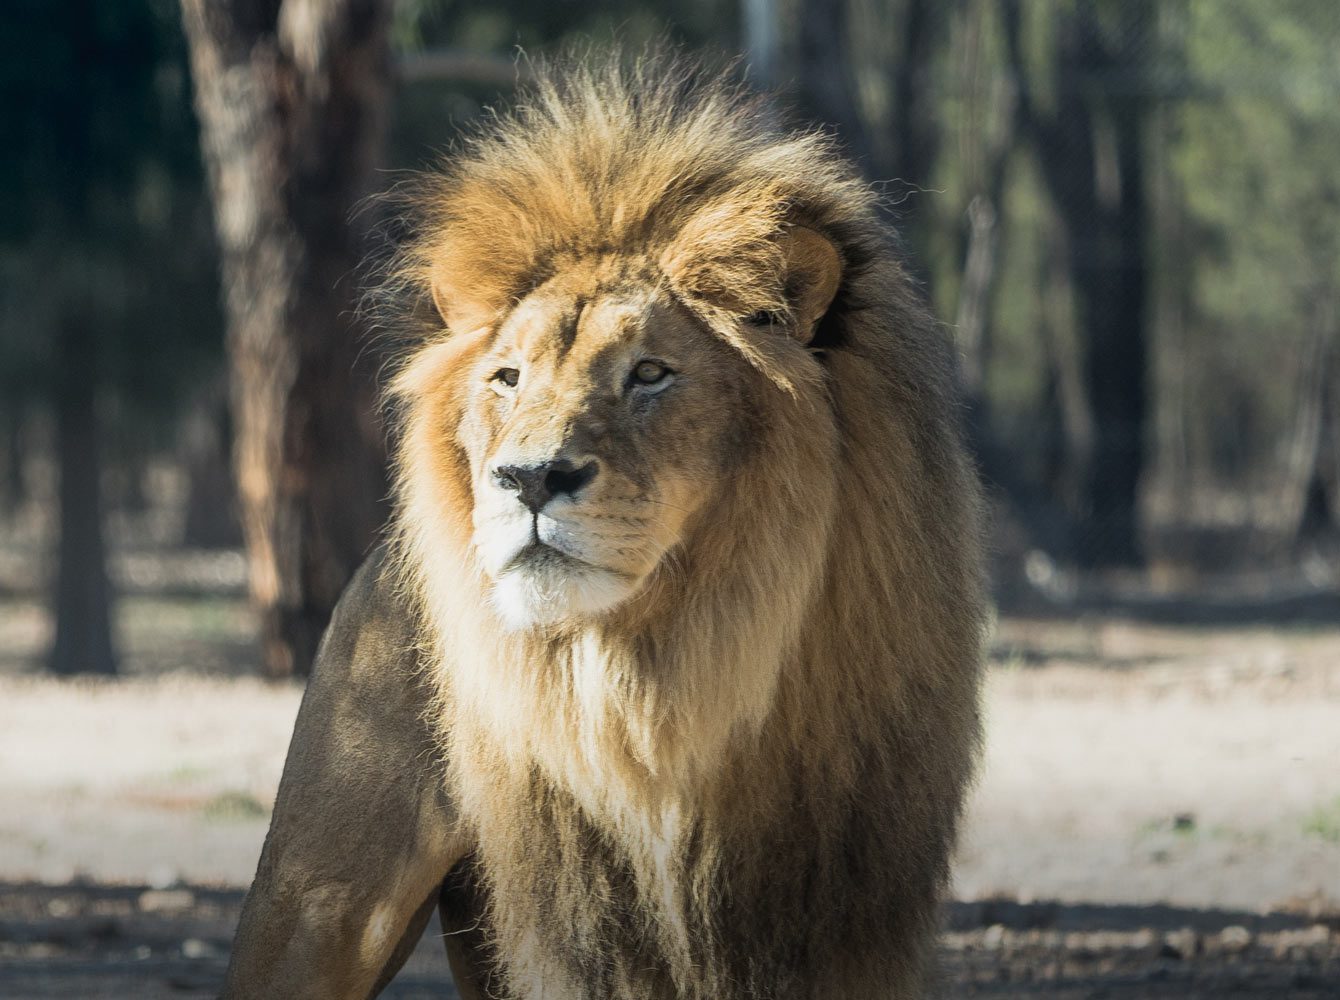 Visit our roar-some African Lion Pride at Taronga Zoo Sydney! 